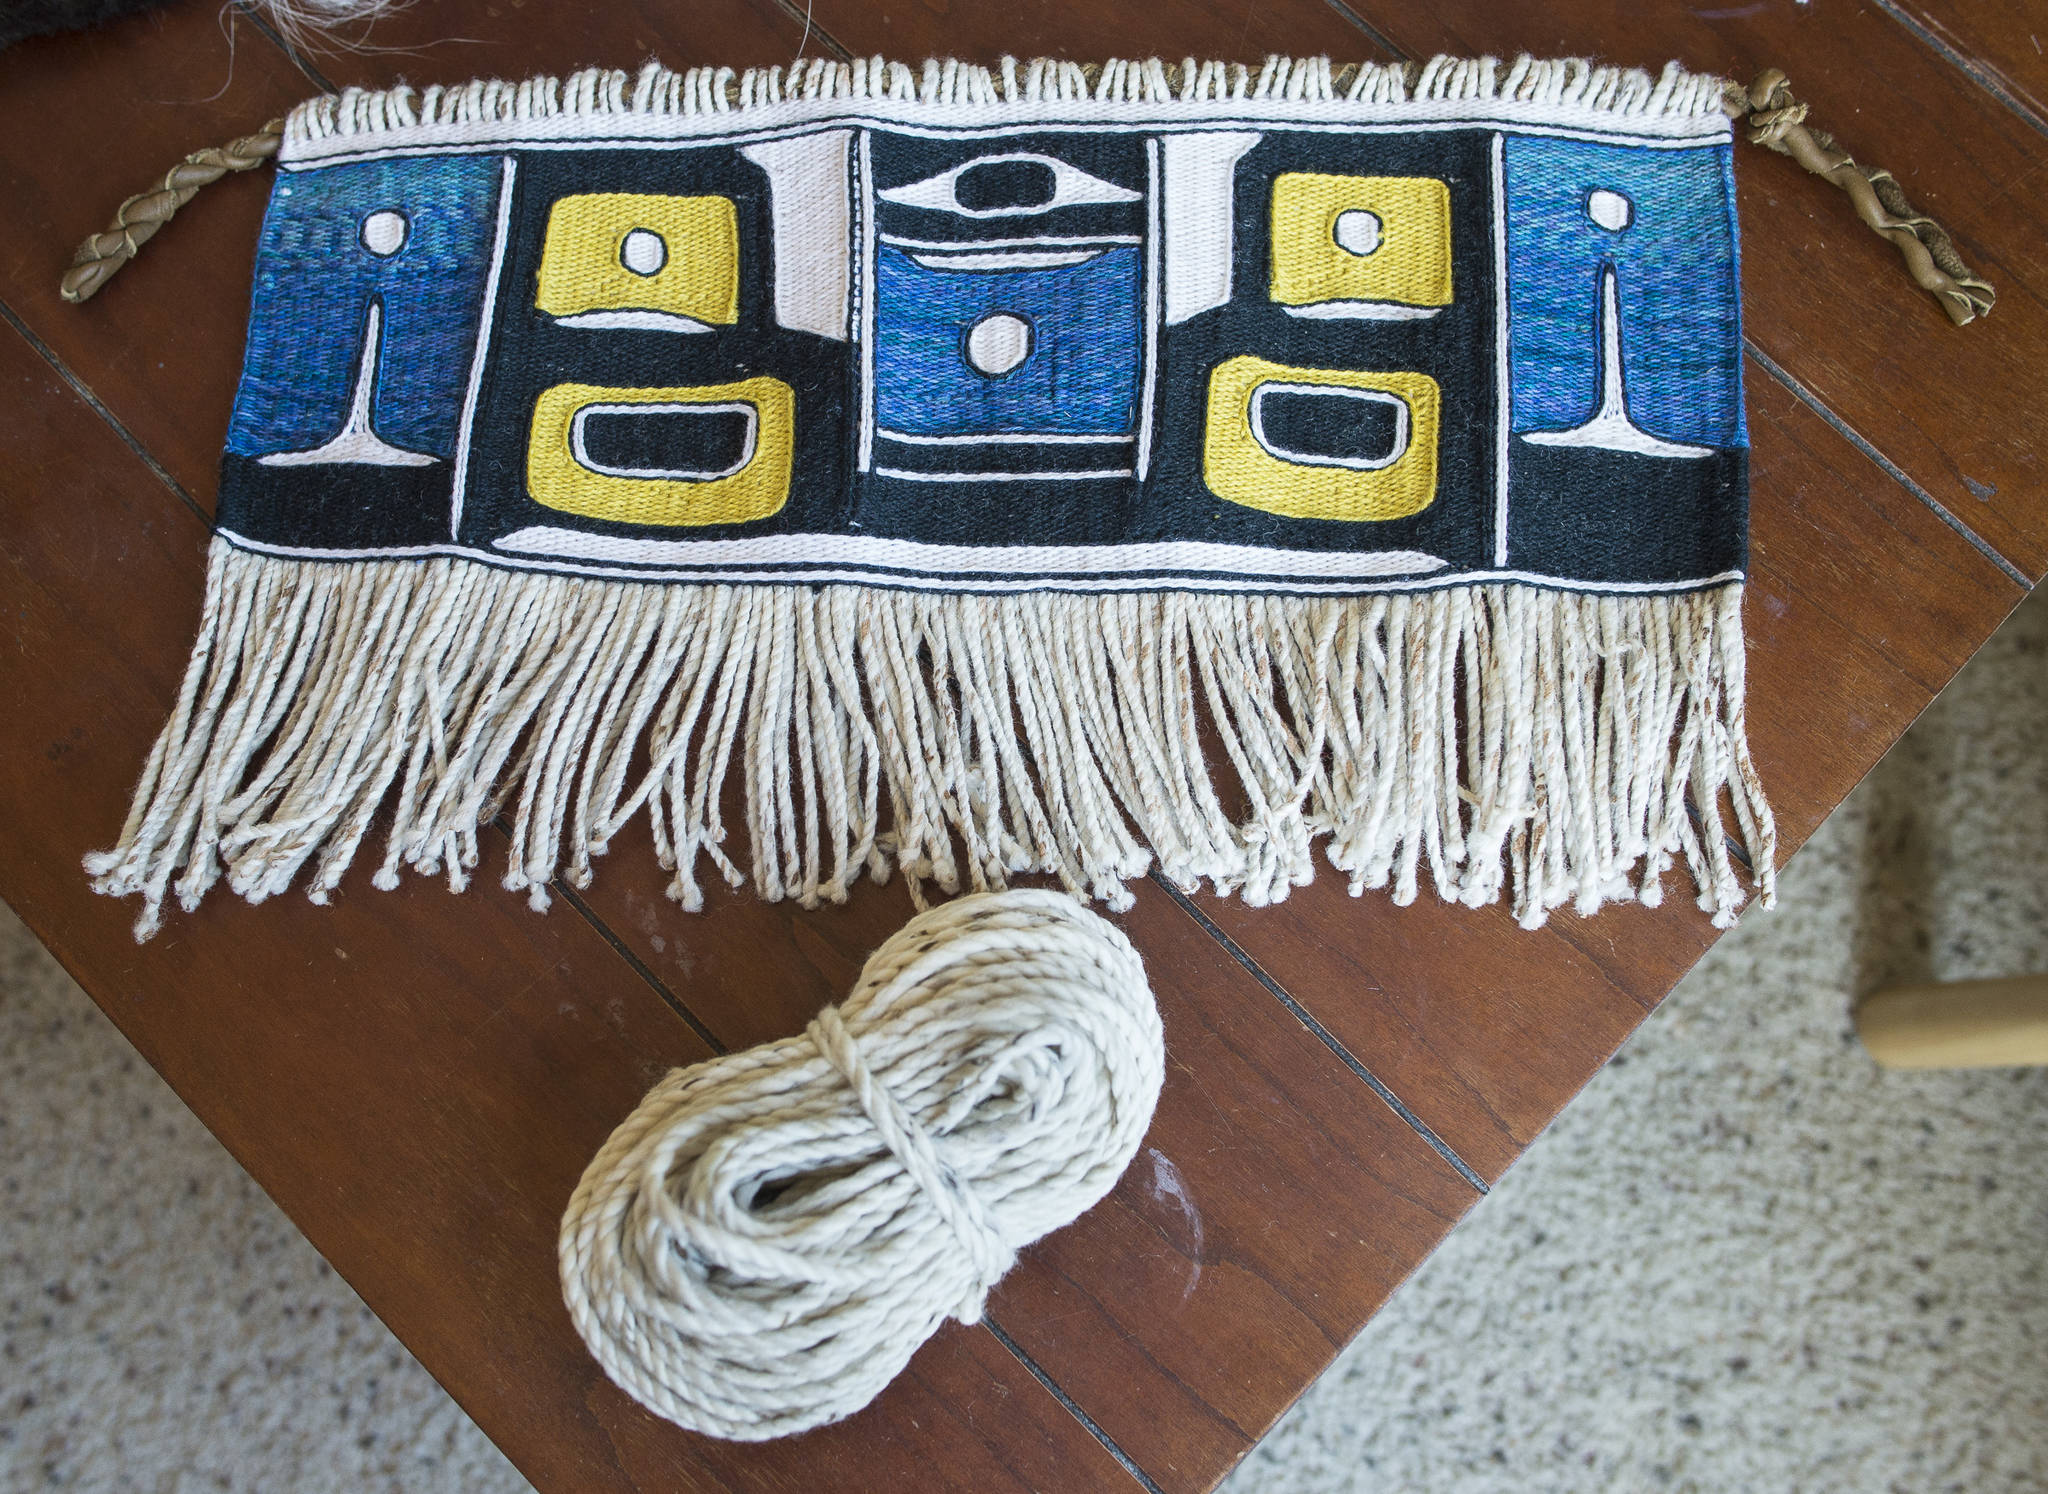 A finished Chilkat weaving and mountain goat wool warp by Juneau weaver Ricky Tagaban on Monday, Sept. 10, 2018. (Michael Penn | Juneau Empire)